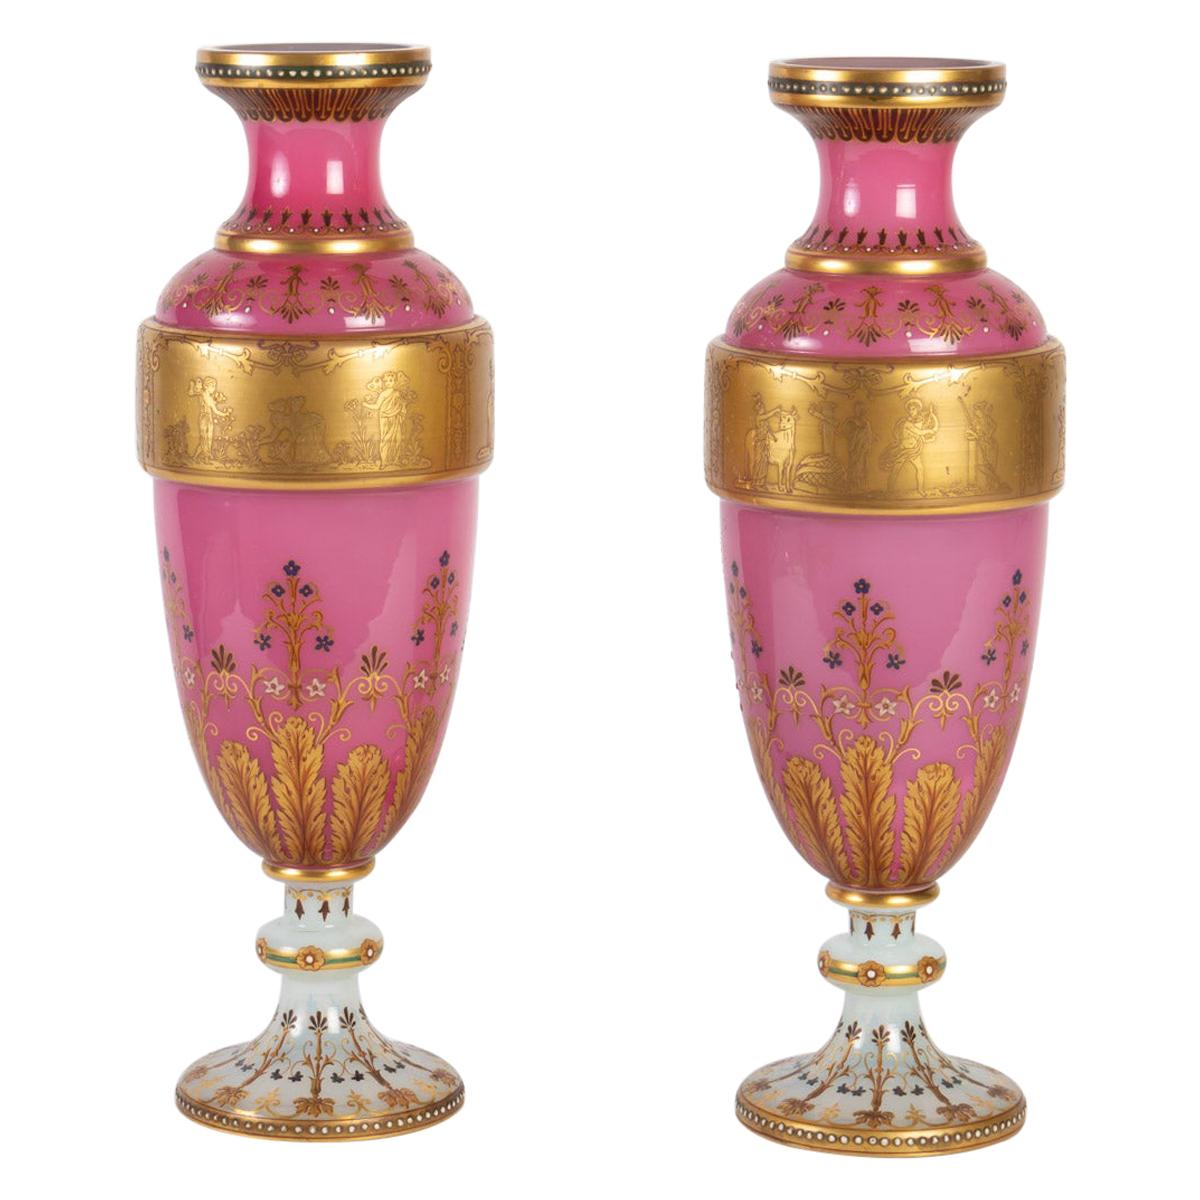 Pair of Opaline Vases, Moser, Lined with White and Pink Opaline For Sale